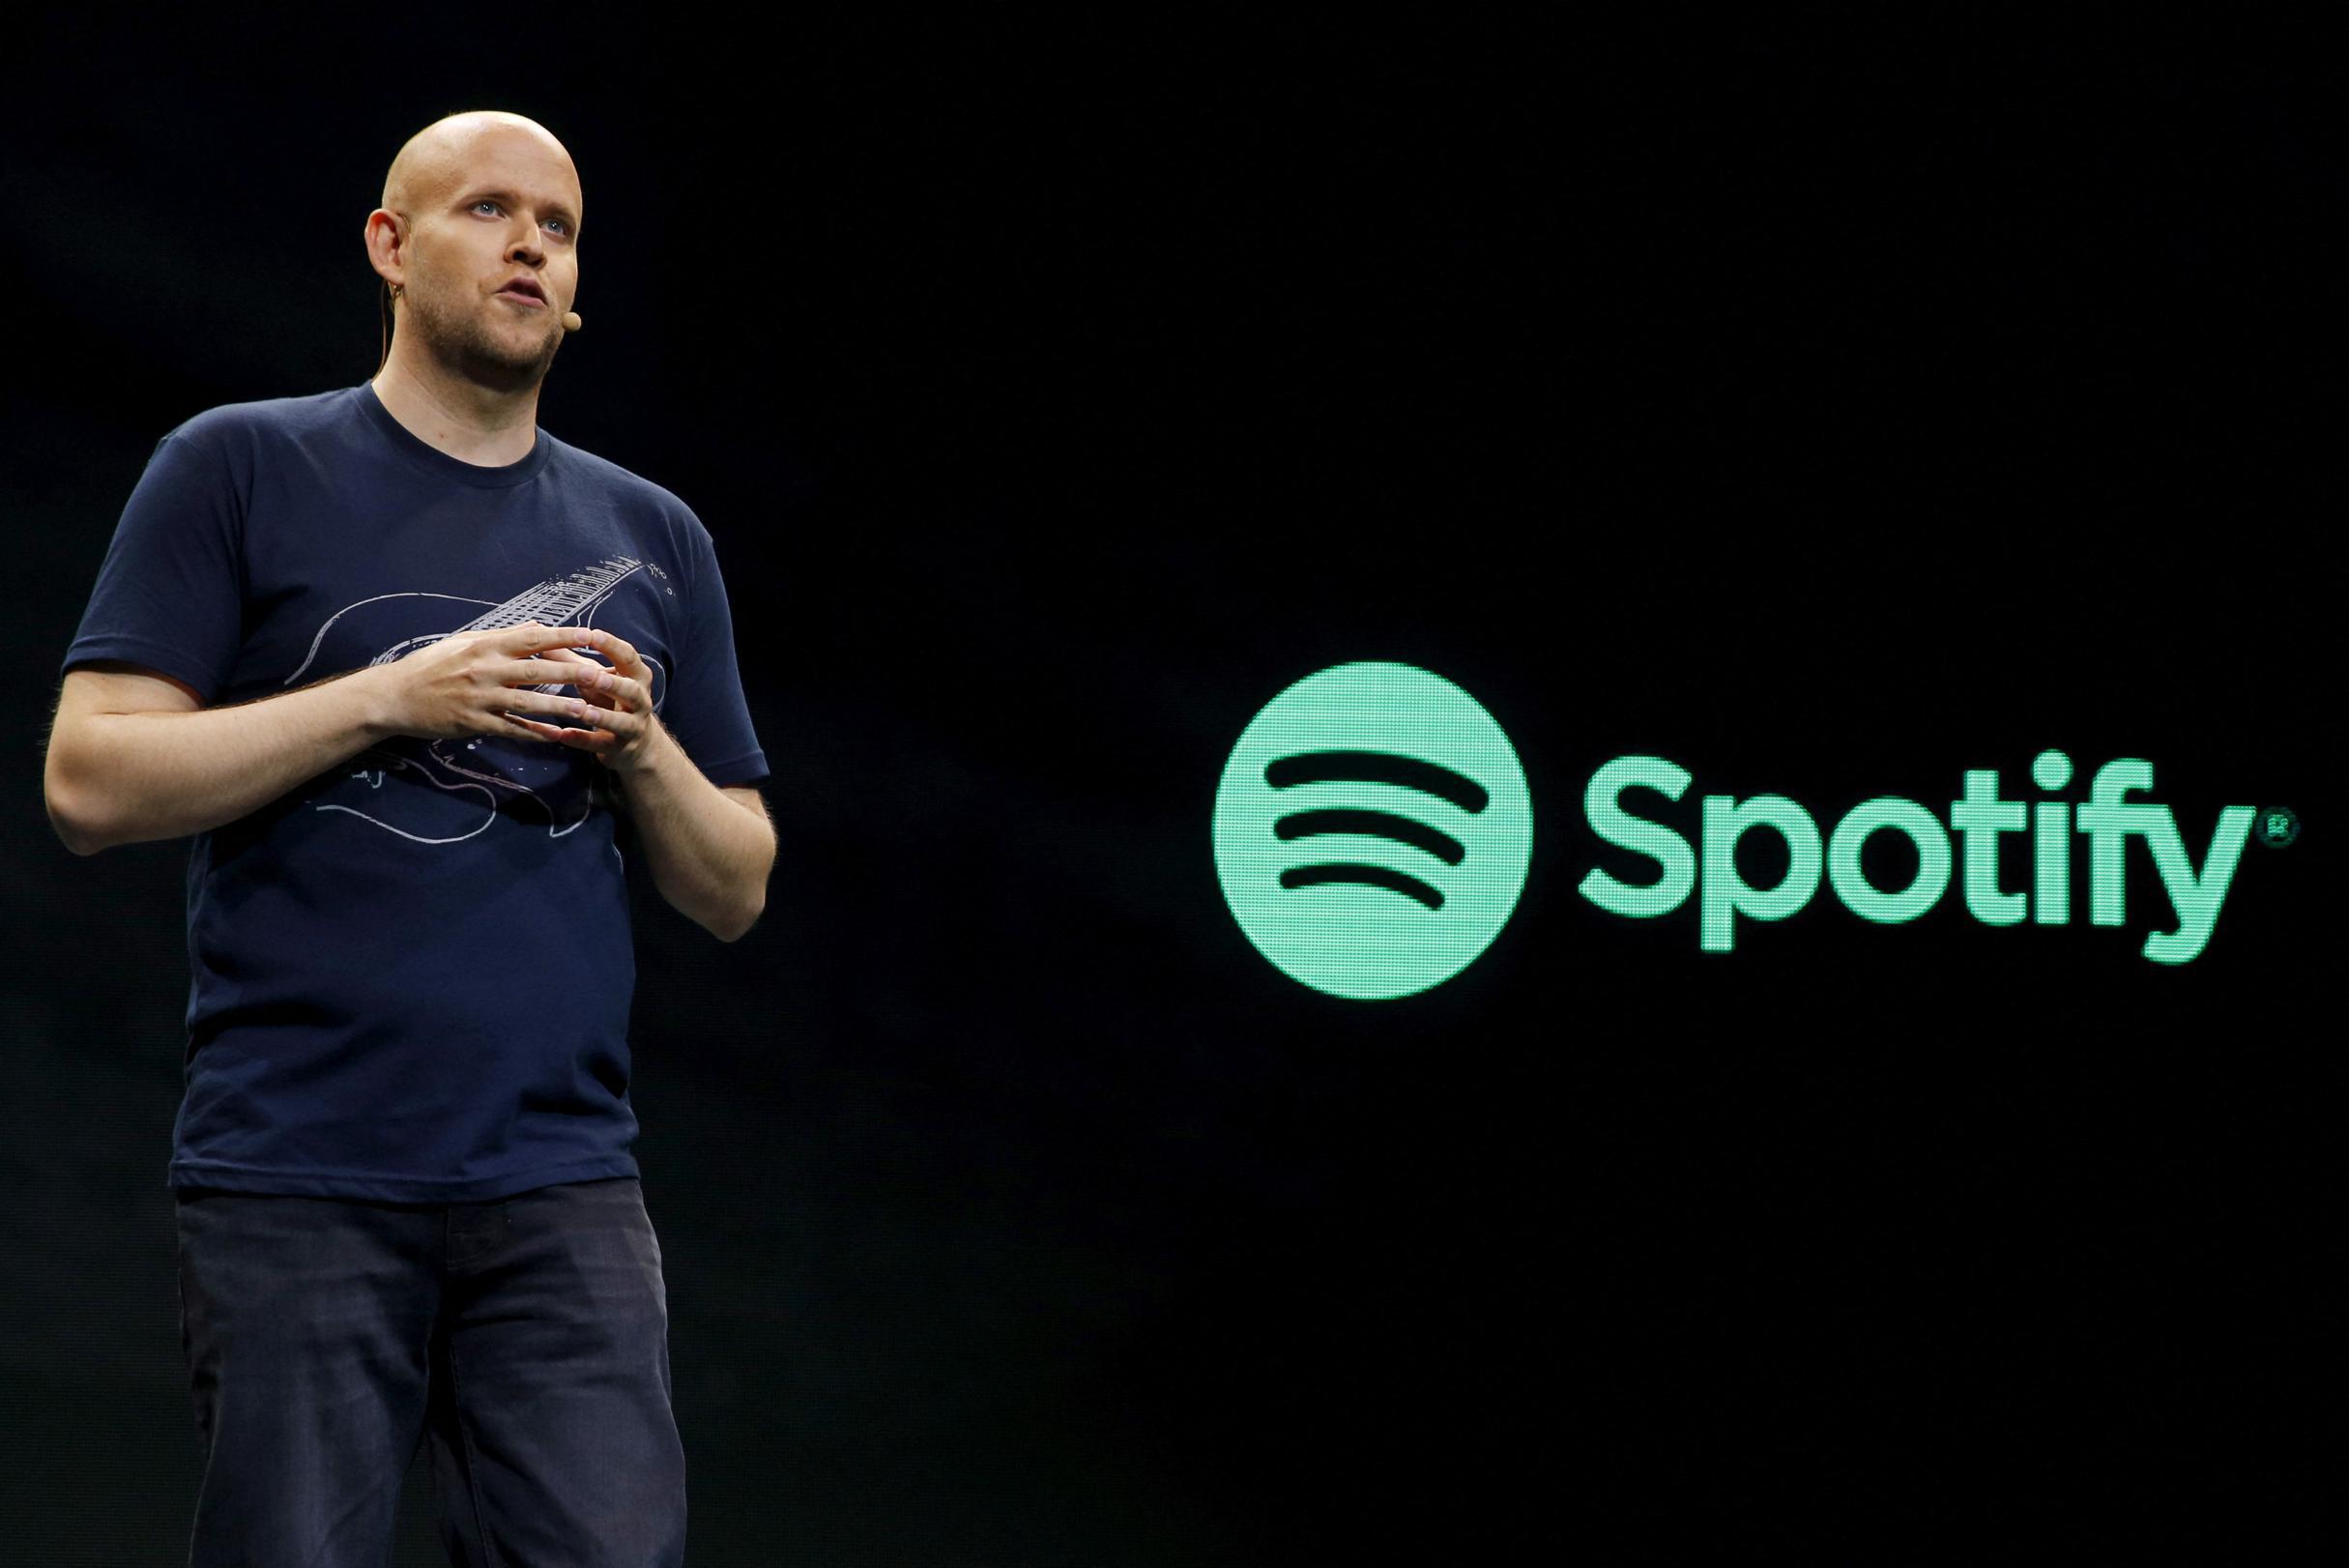 Spotify to Cut 1,500 Jobs: “We’ll Say Goodbye to Many Smart, Talented, and Hardworking People”